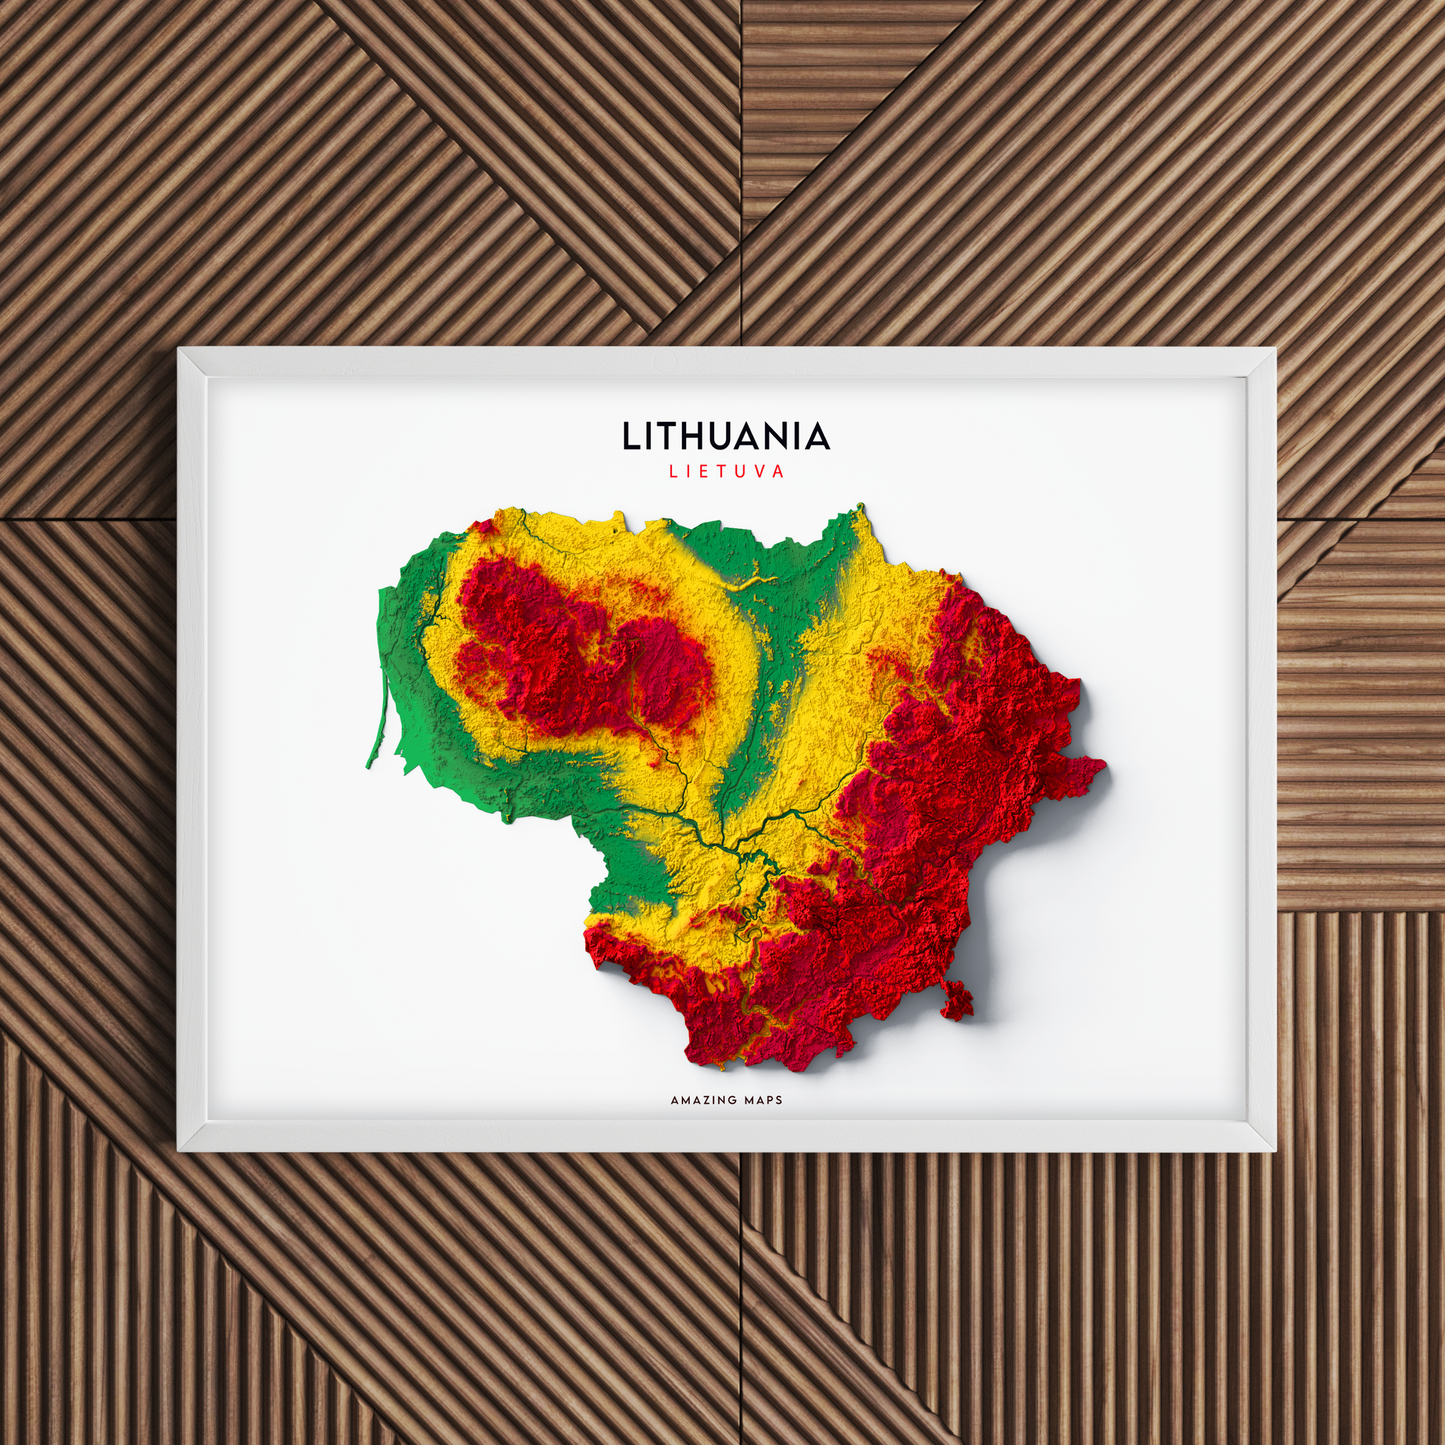 Lithuania Relief map